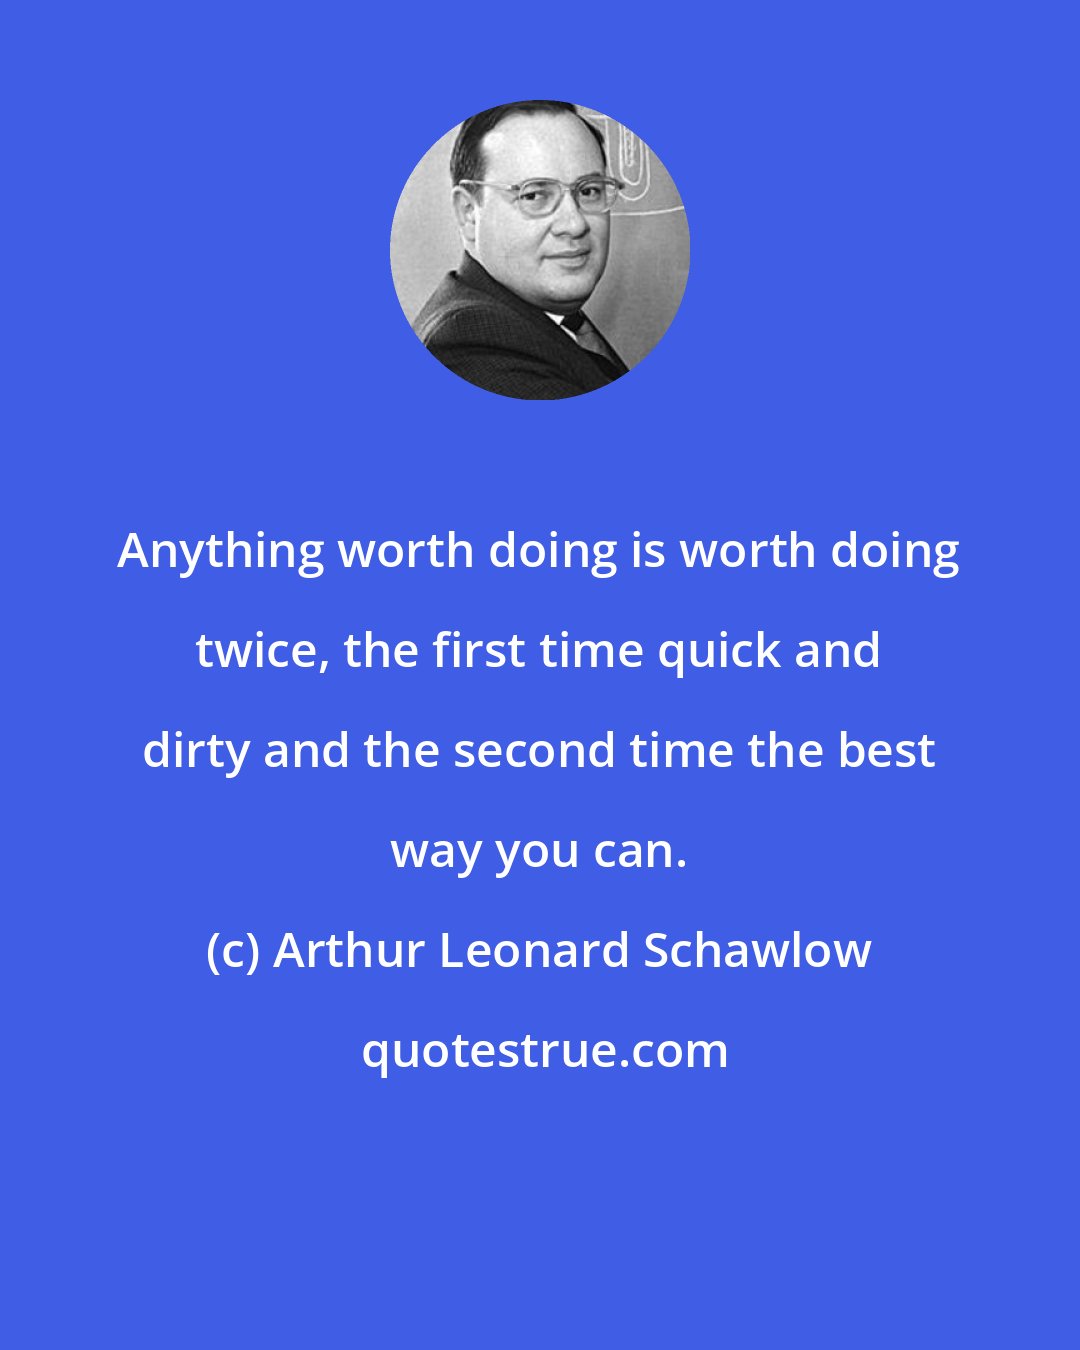 Arthur Leonard Schawlow: Anything worth doing is worth doing twice, the first time quick and dirty and the second time the best way you can.